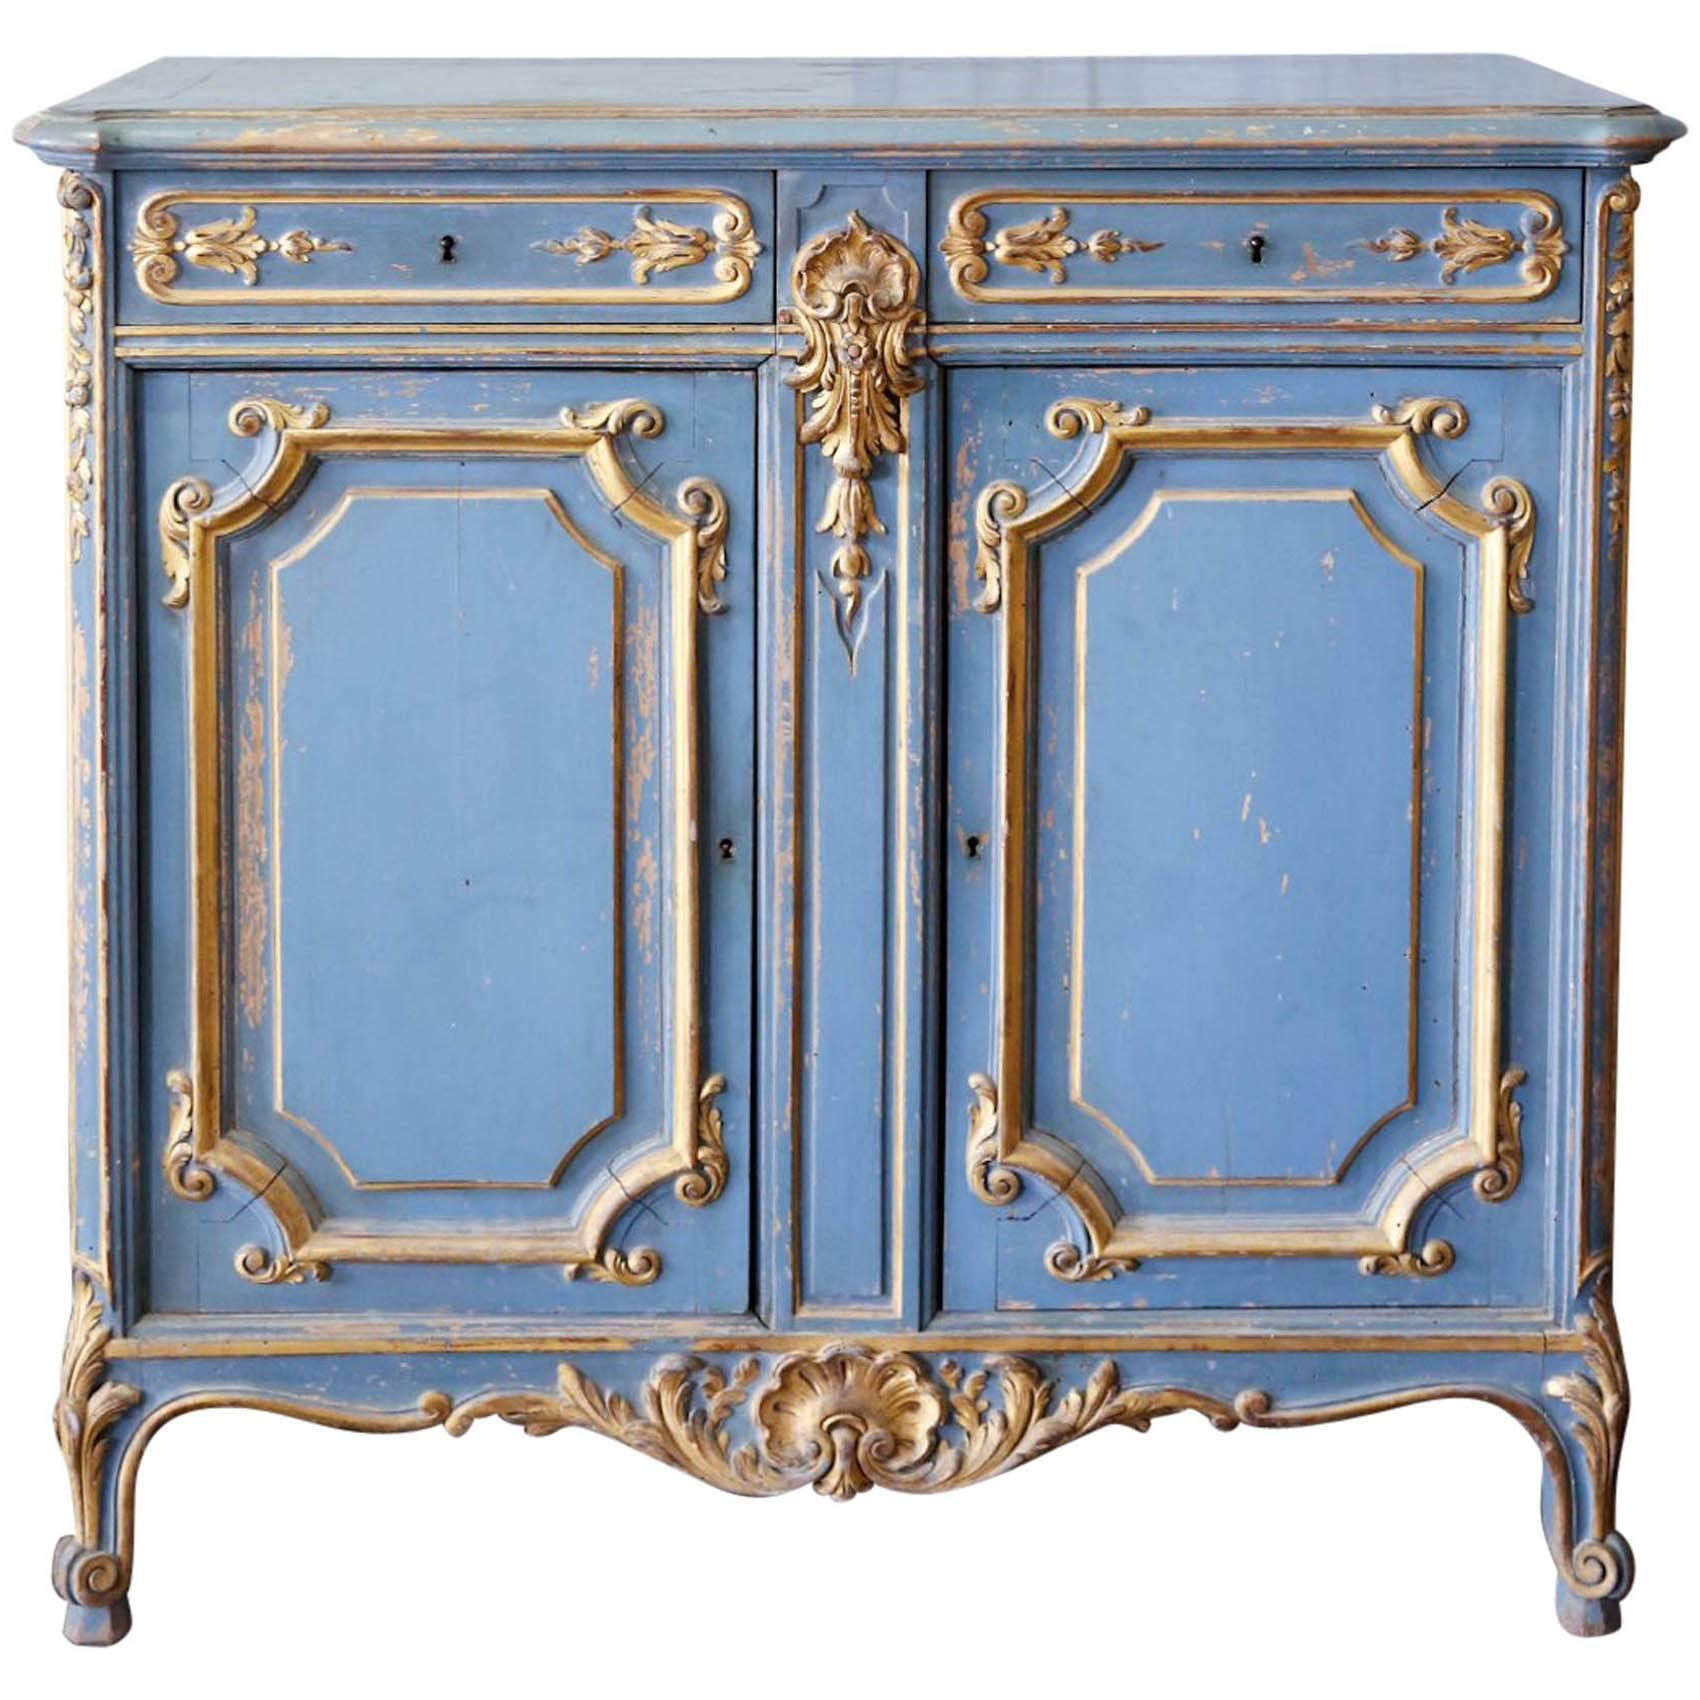 19th Century French Hand-Painted Cabinet in Louis XV Style